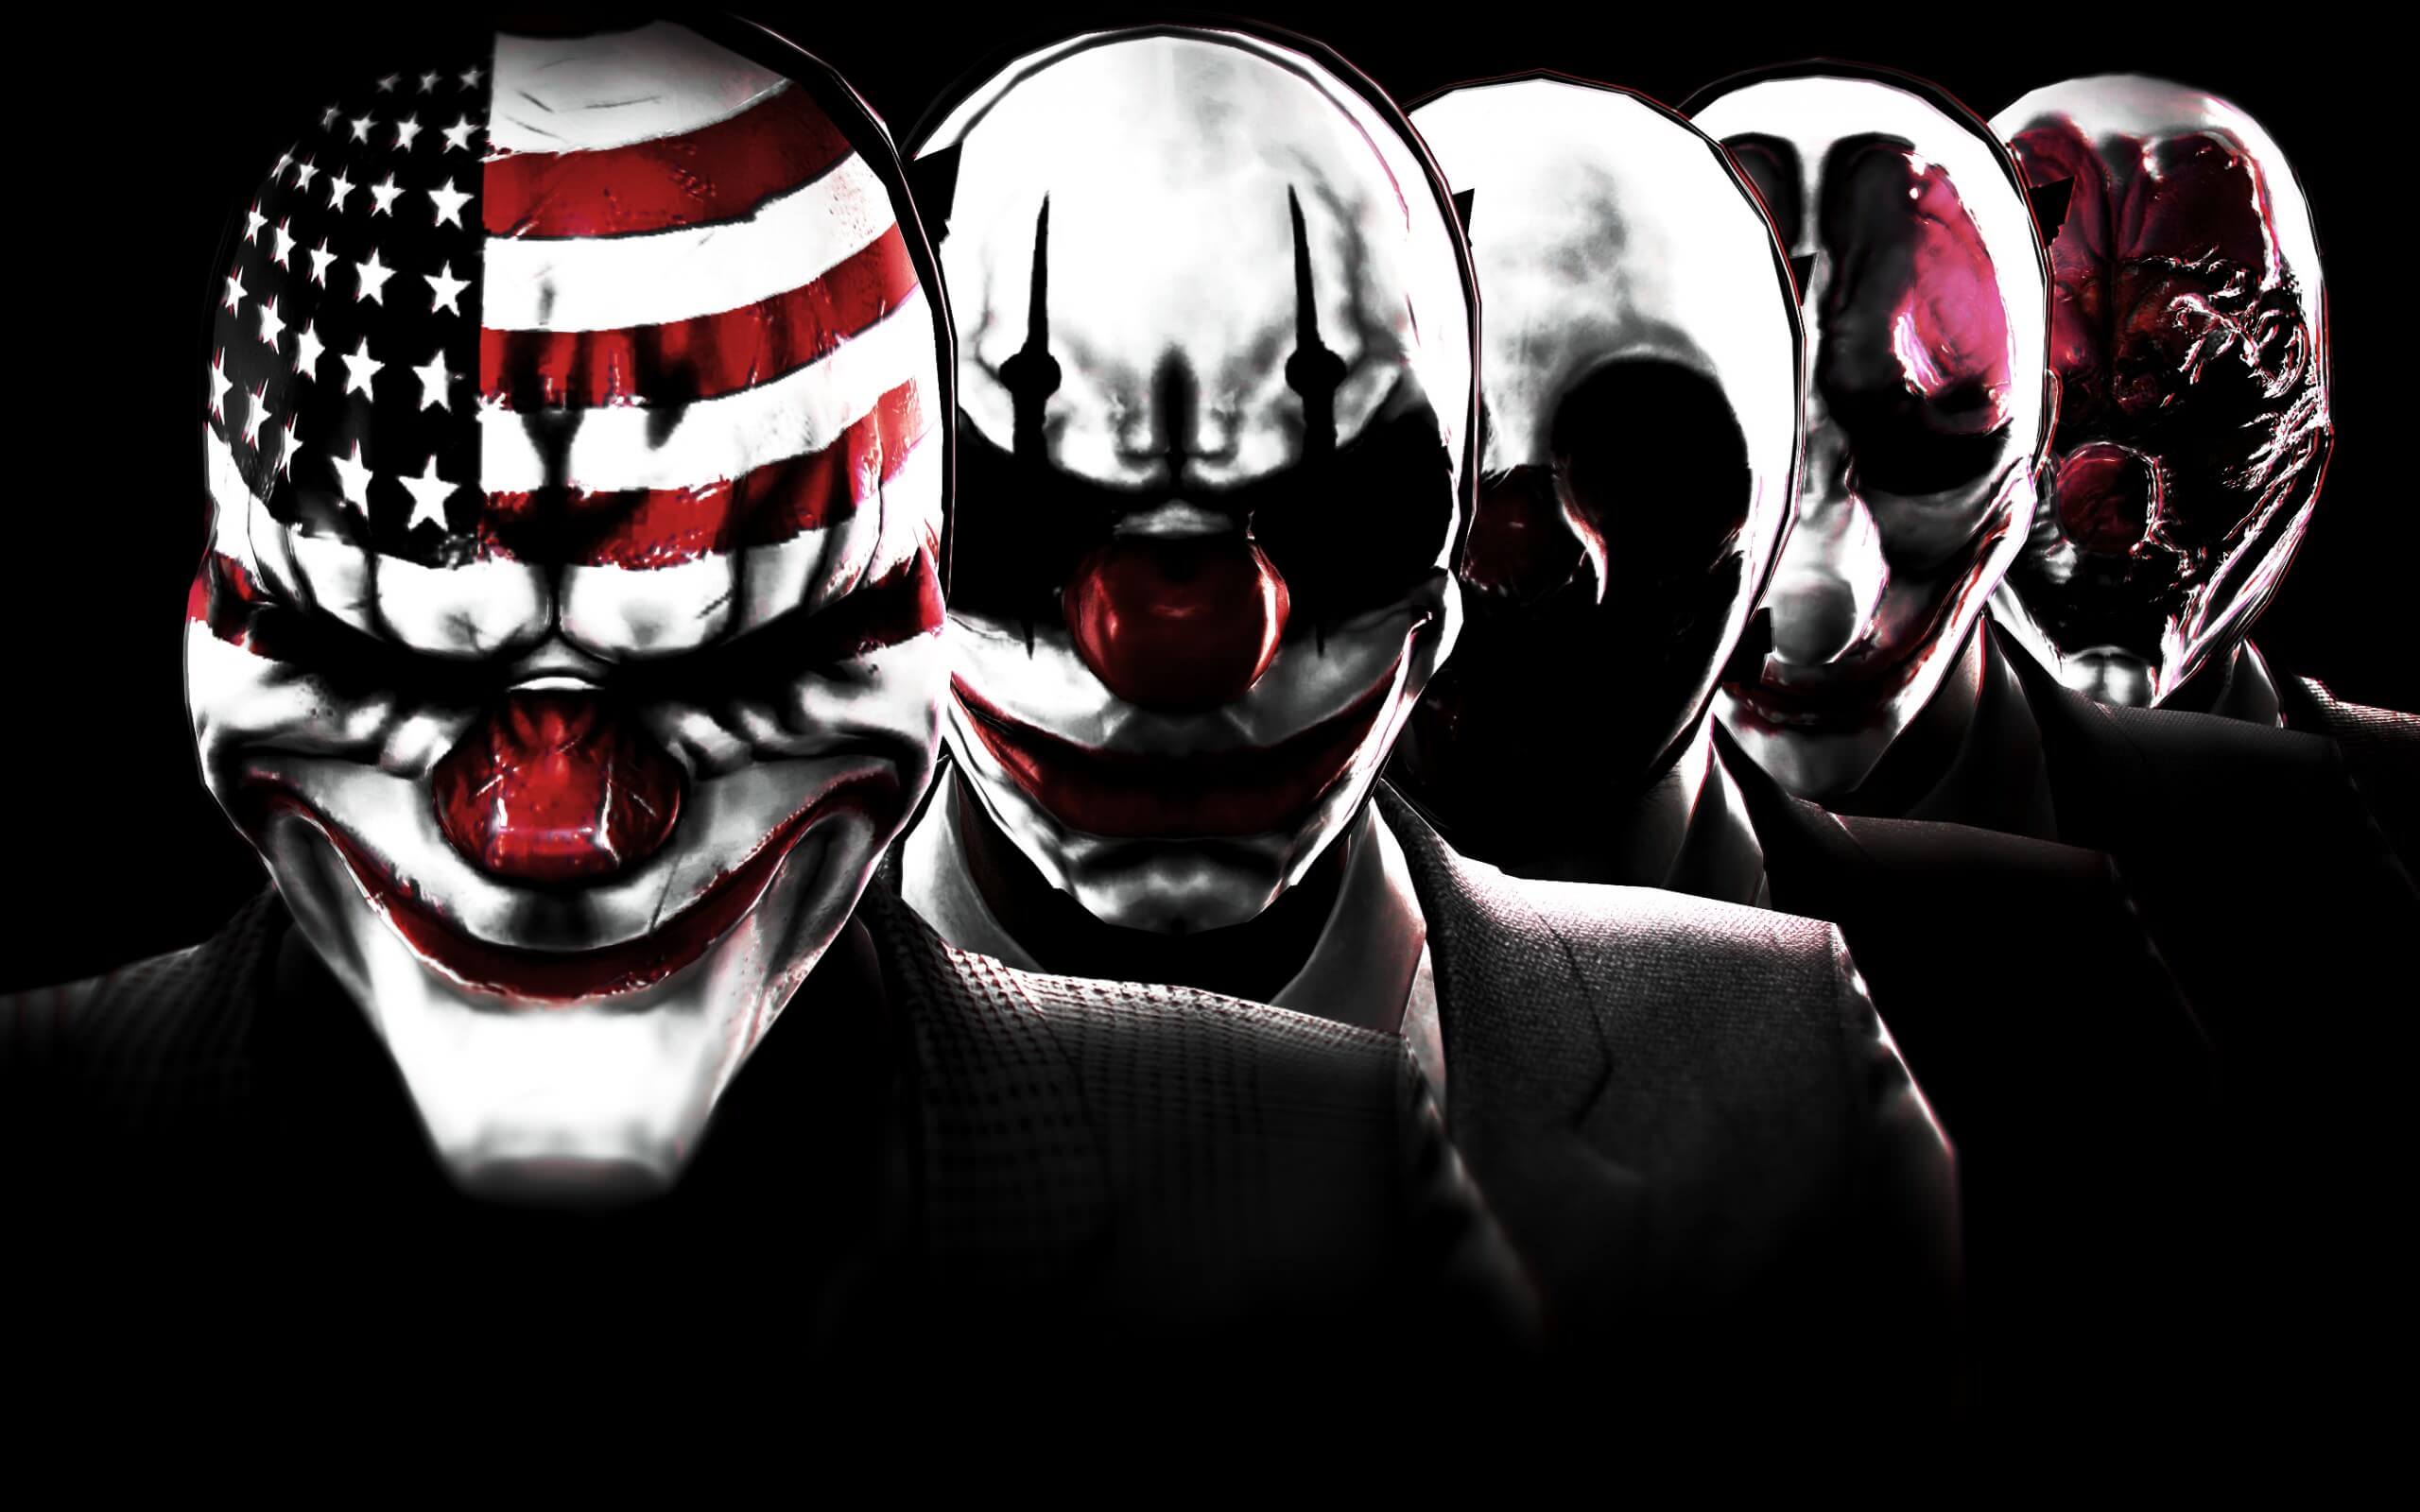 payday 2 pc download free